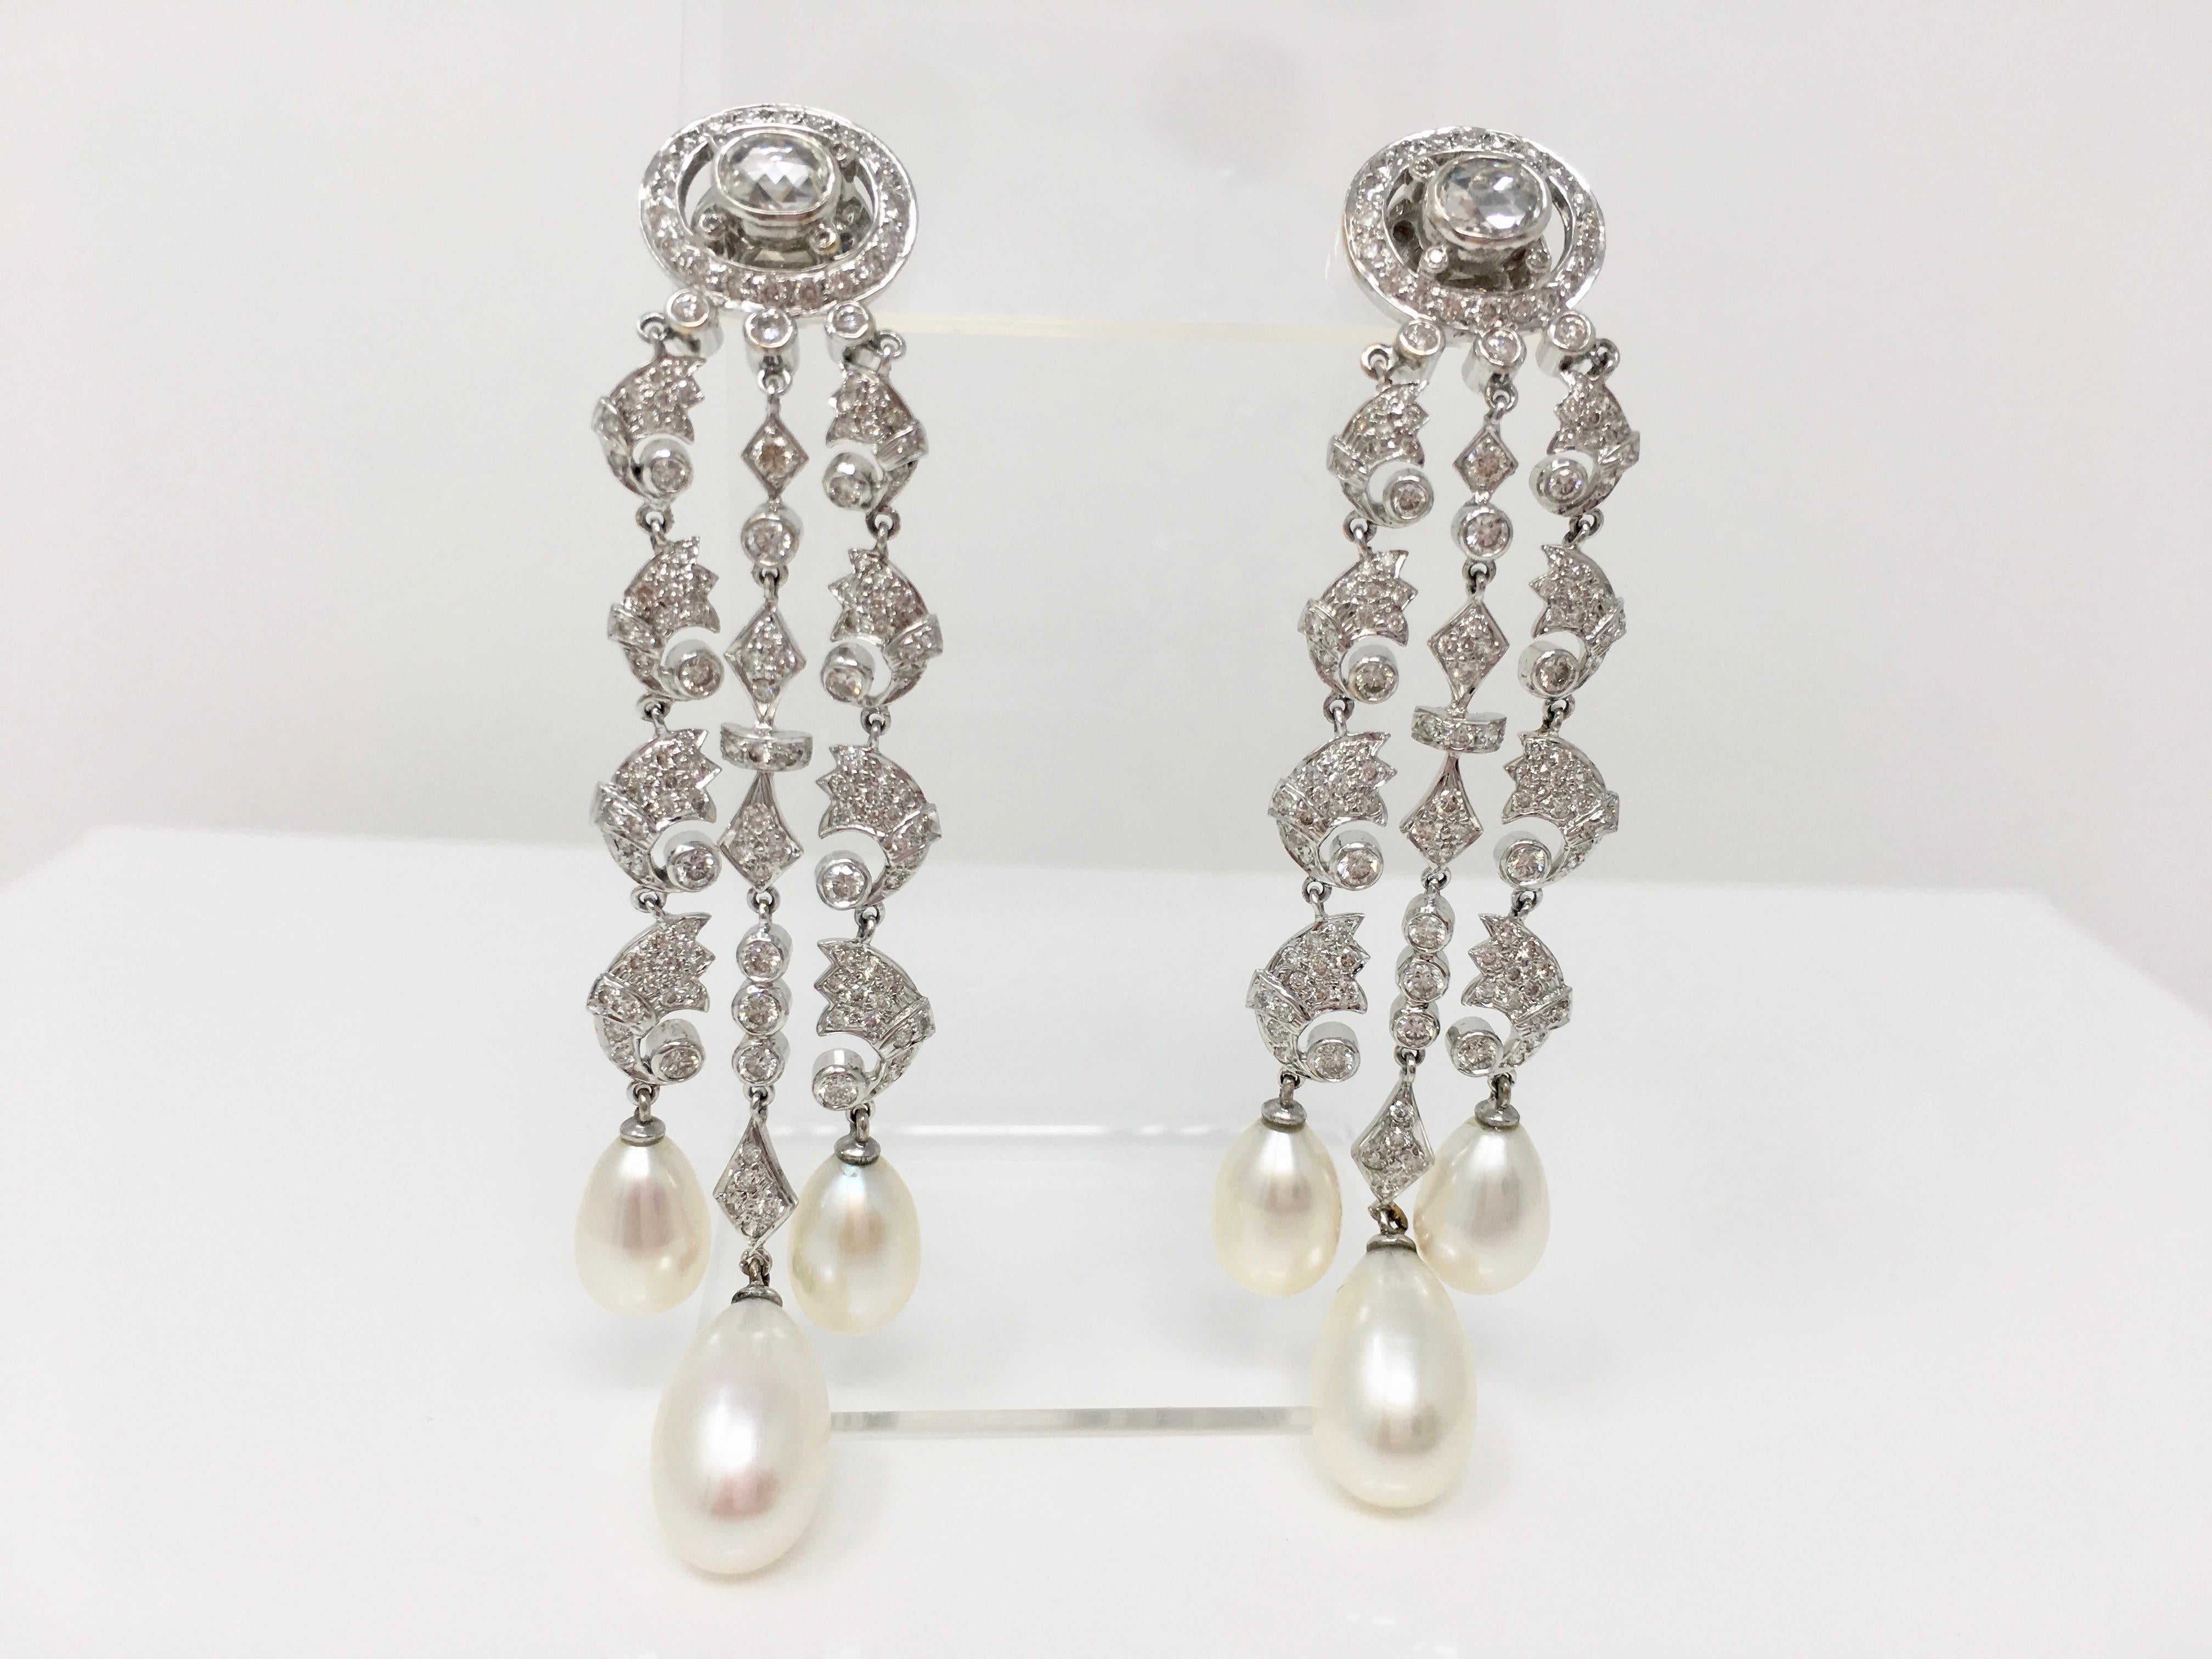 Gorgeous 18 k white gold chandelier earrings featuring 6 Carats approx of white round brilliant diamonds with VS clarity GH color and 6 south sea pearls with beautiful lusture  . The measurements of the earring is 3.50 inches in length. These